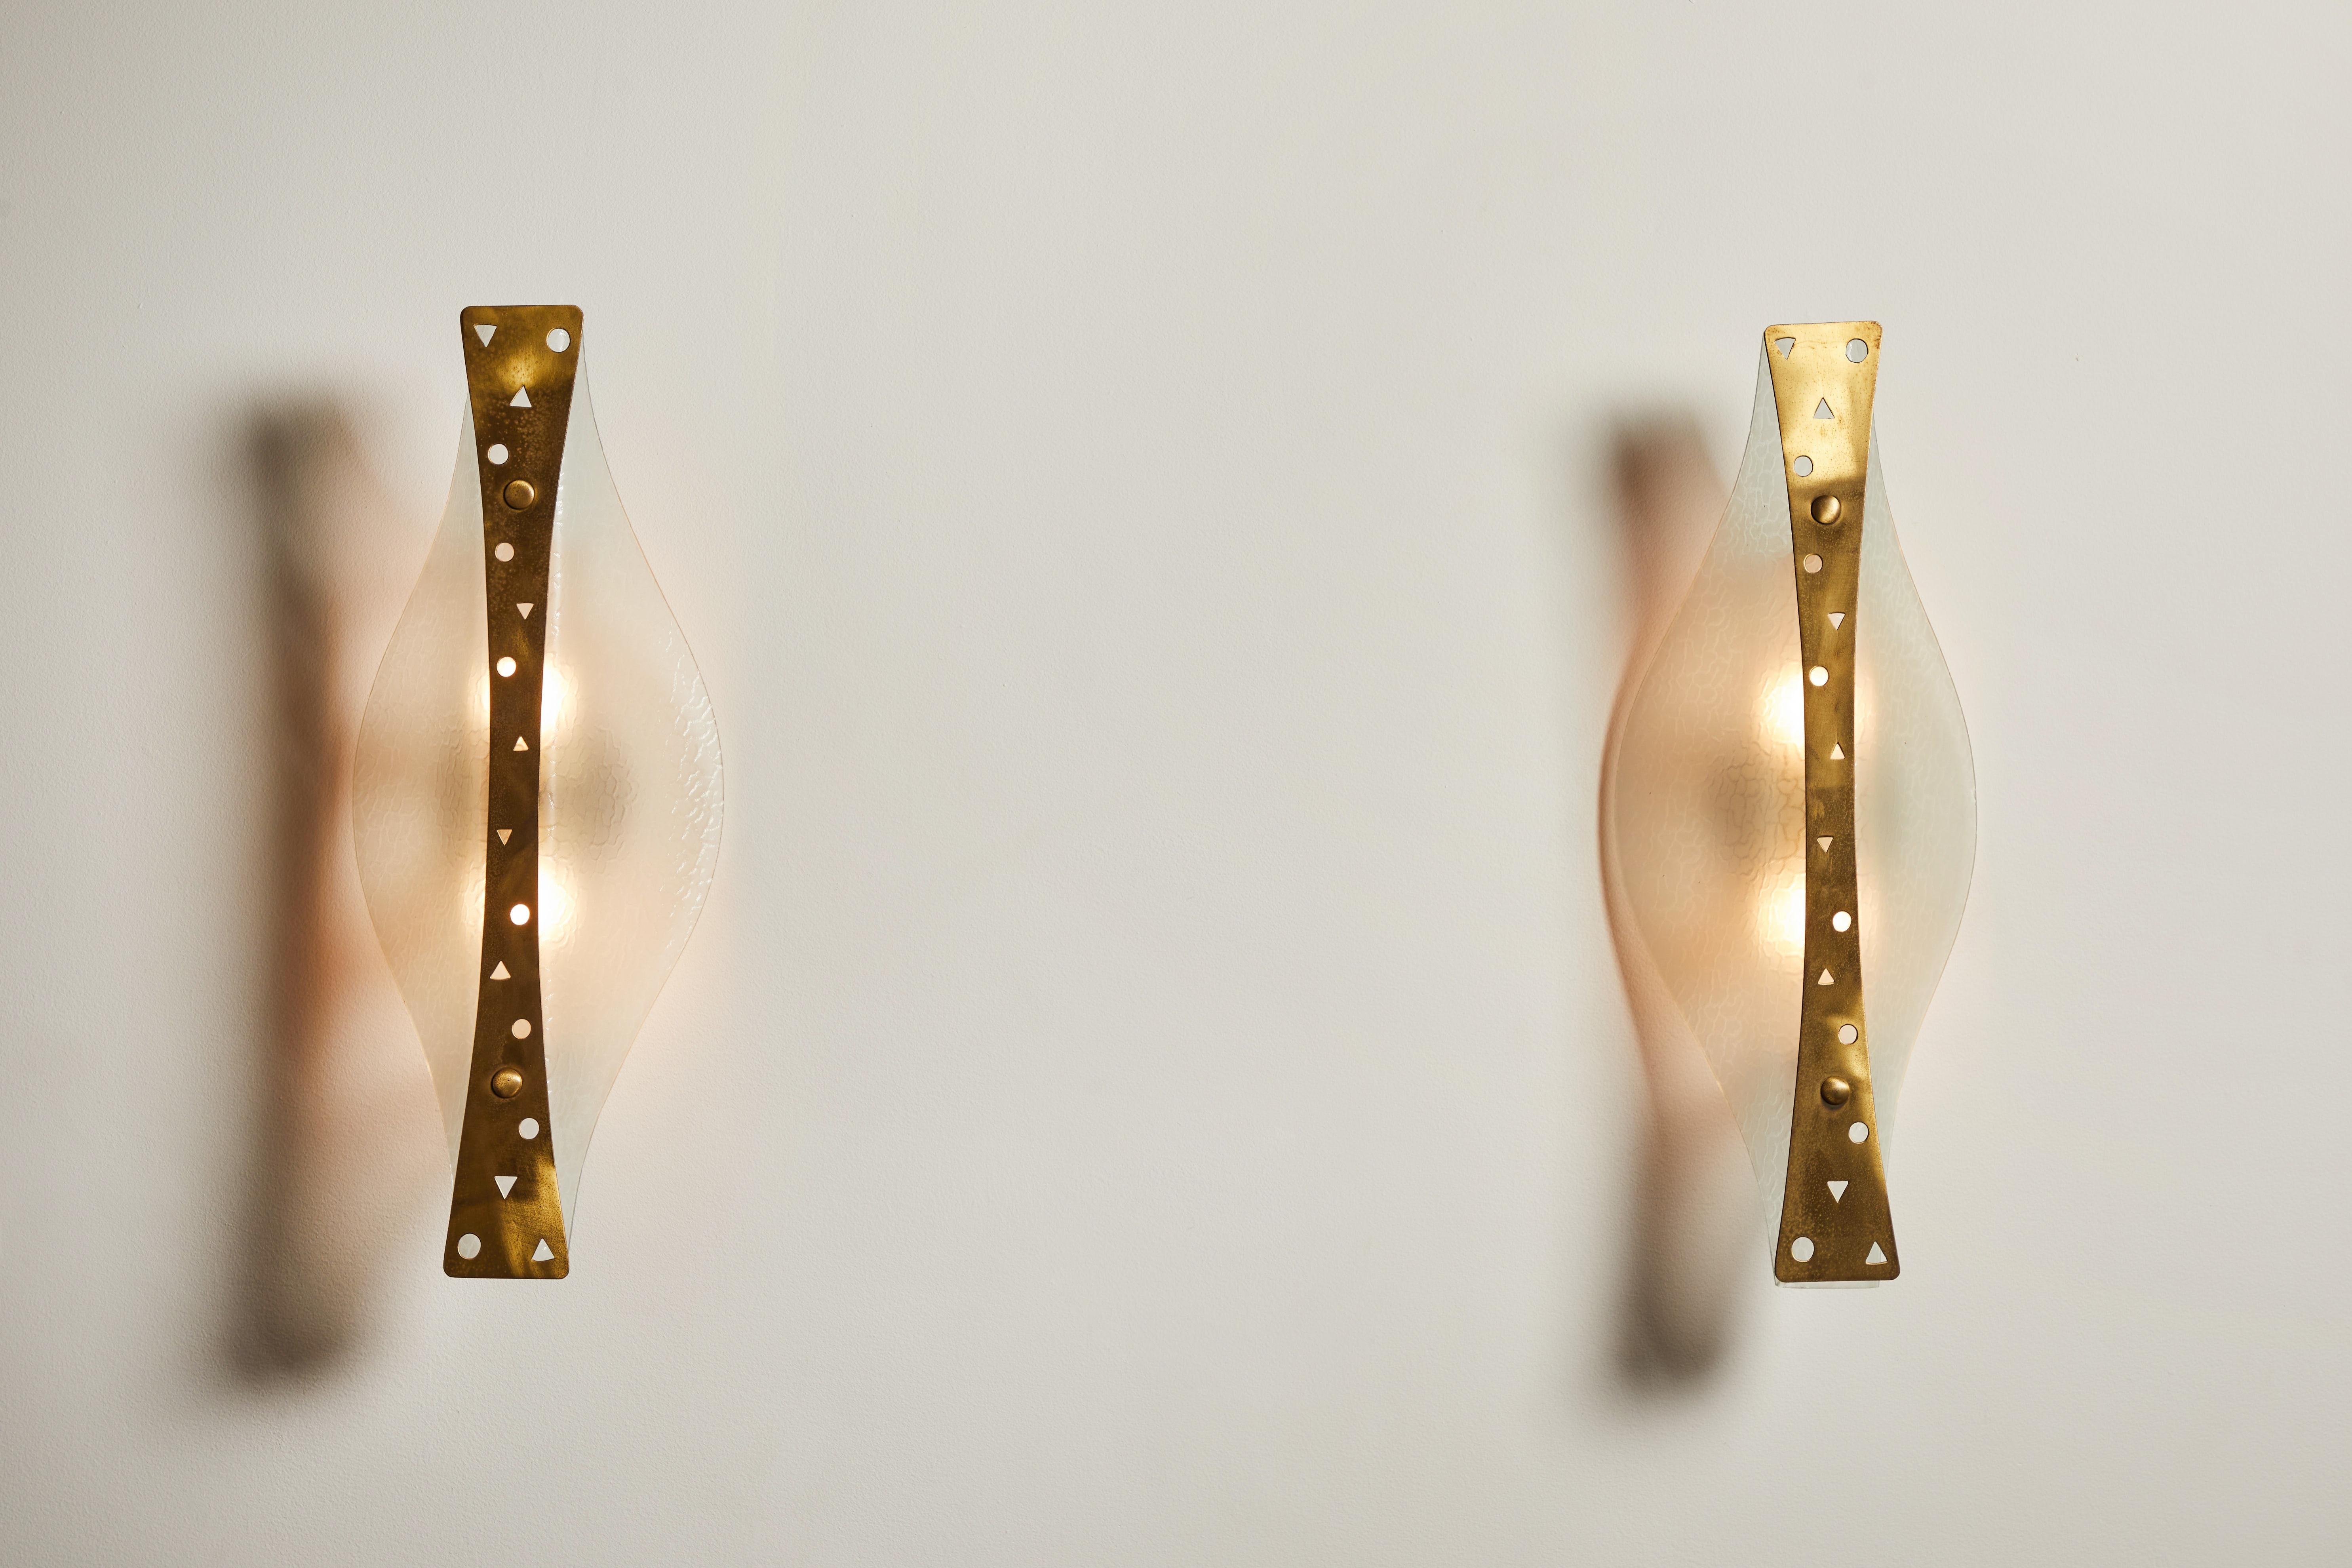 Pair of rare Sconces by Stilnovo. Manufactured in Italy, circa 1950s. Textured glass diffusers, brass armature. Rewired for U.S. junction boxes. Each light takes one E27 100w maximum bulb. Bulbs provided as a one time courtesy.